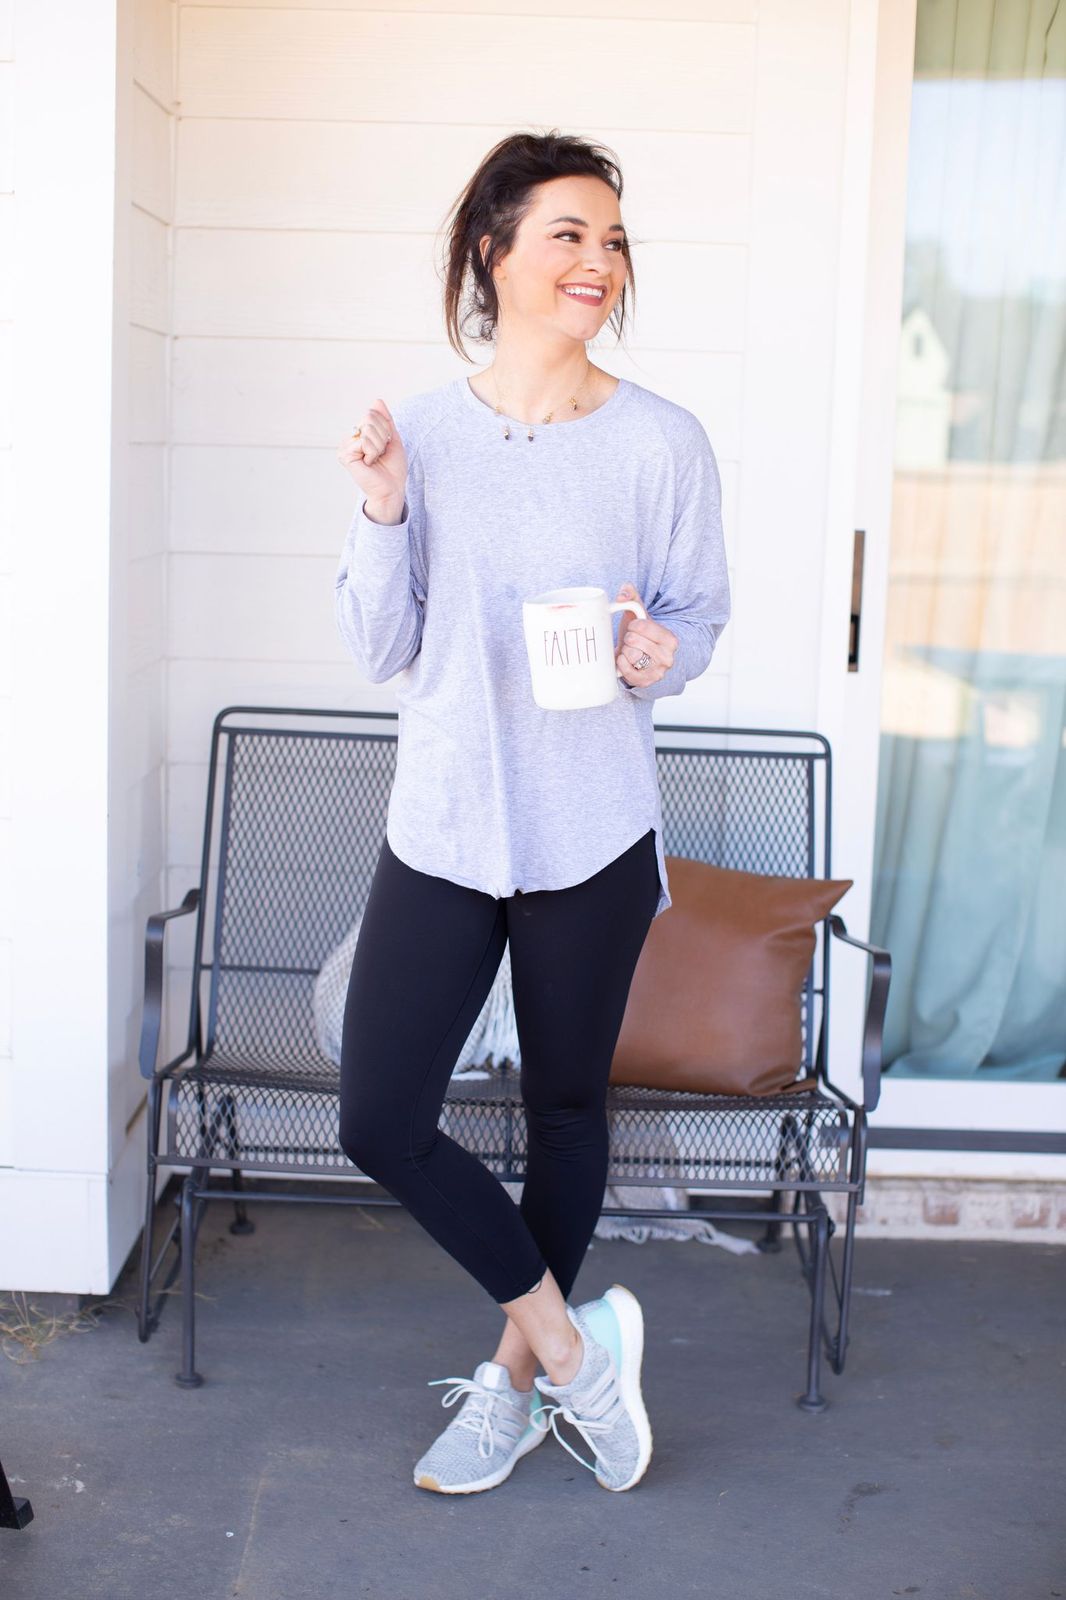 Lifestyle + fashion blogger, My Life Well Loved, shares her best Lululemon dupes for women this season! Click NOW to shop!